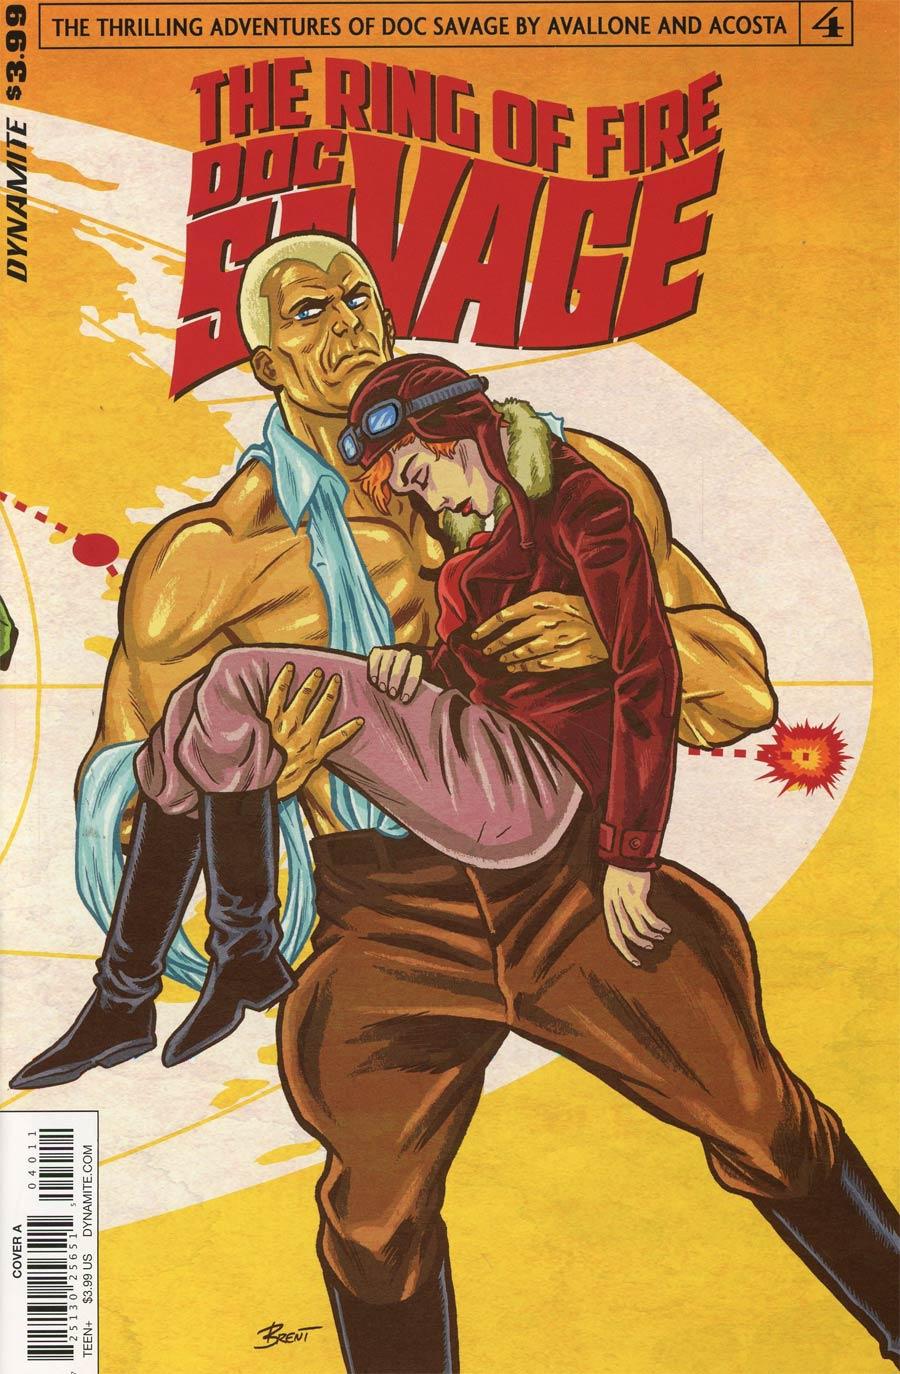 Doc Savage Ring Of Fire Vol. 1 #4